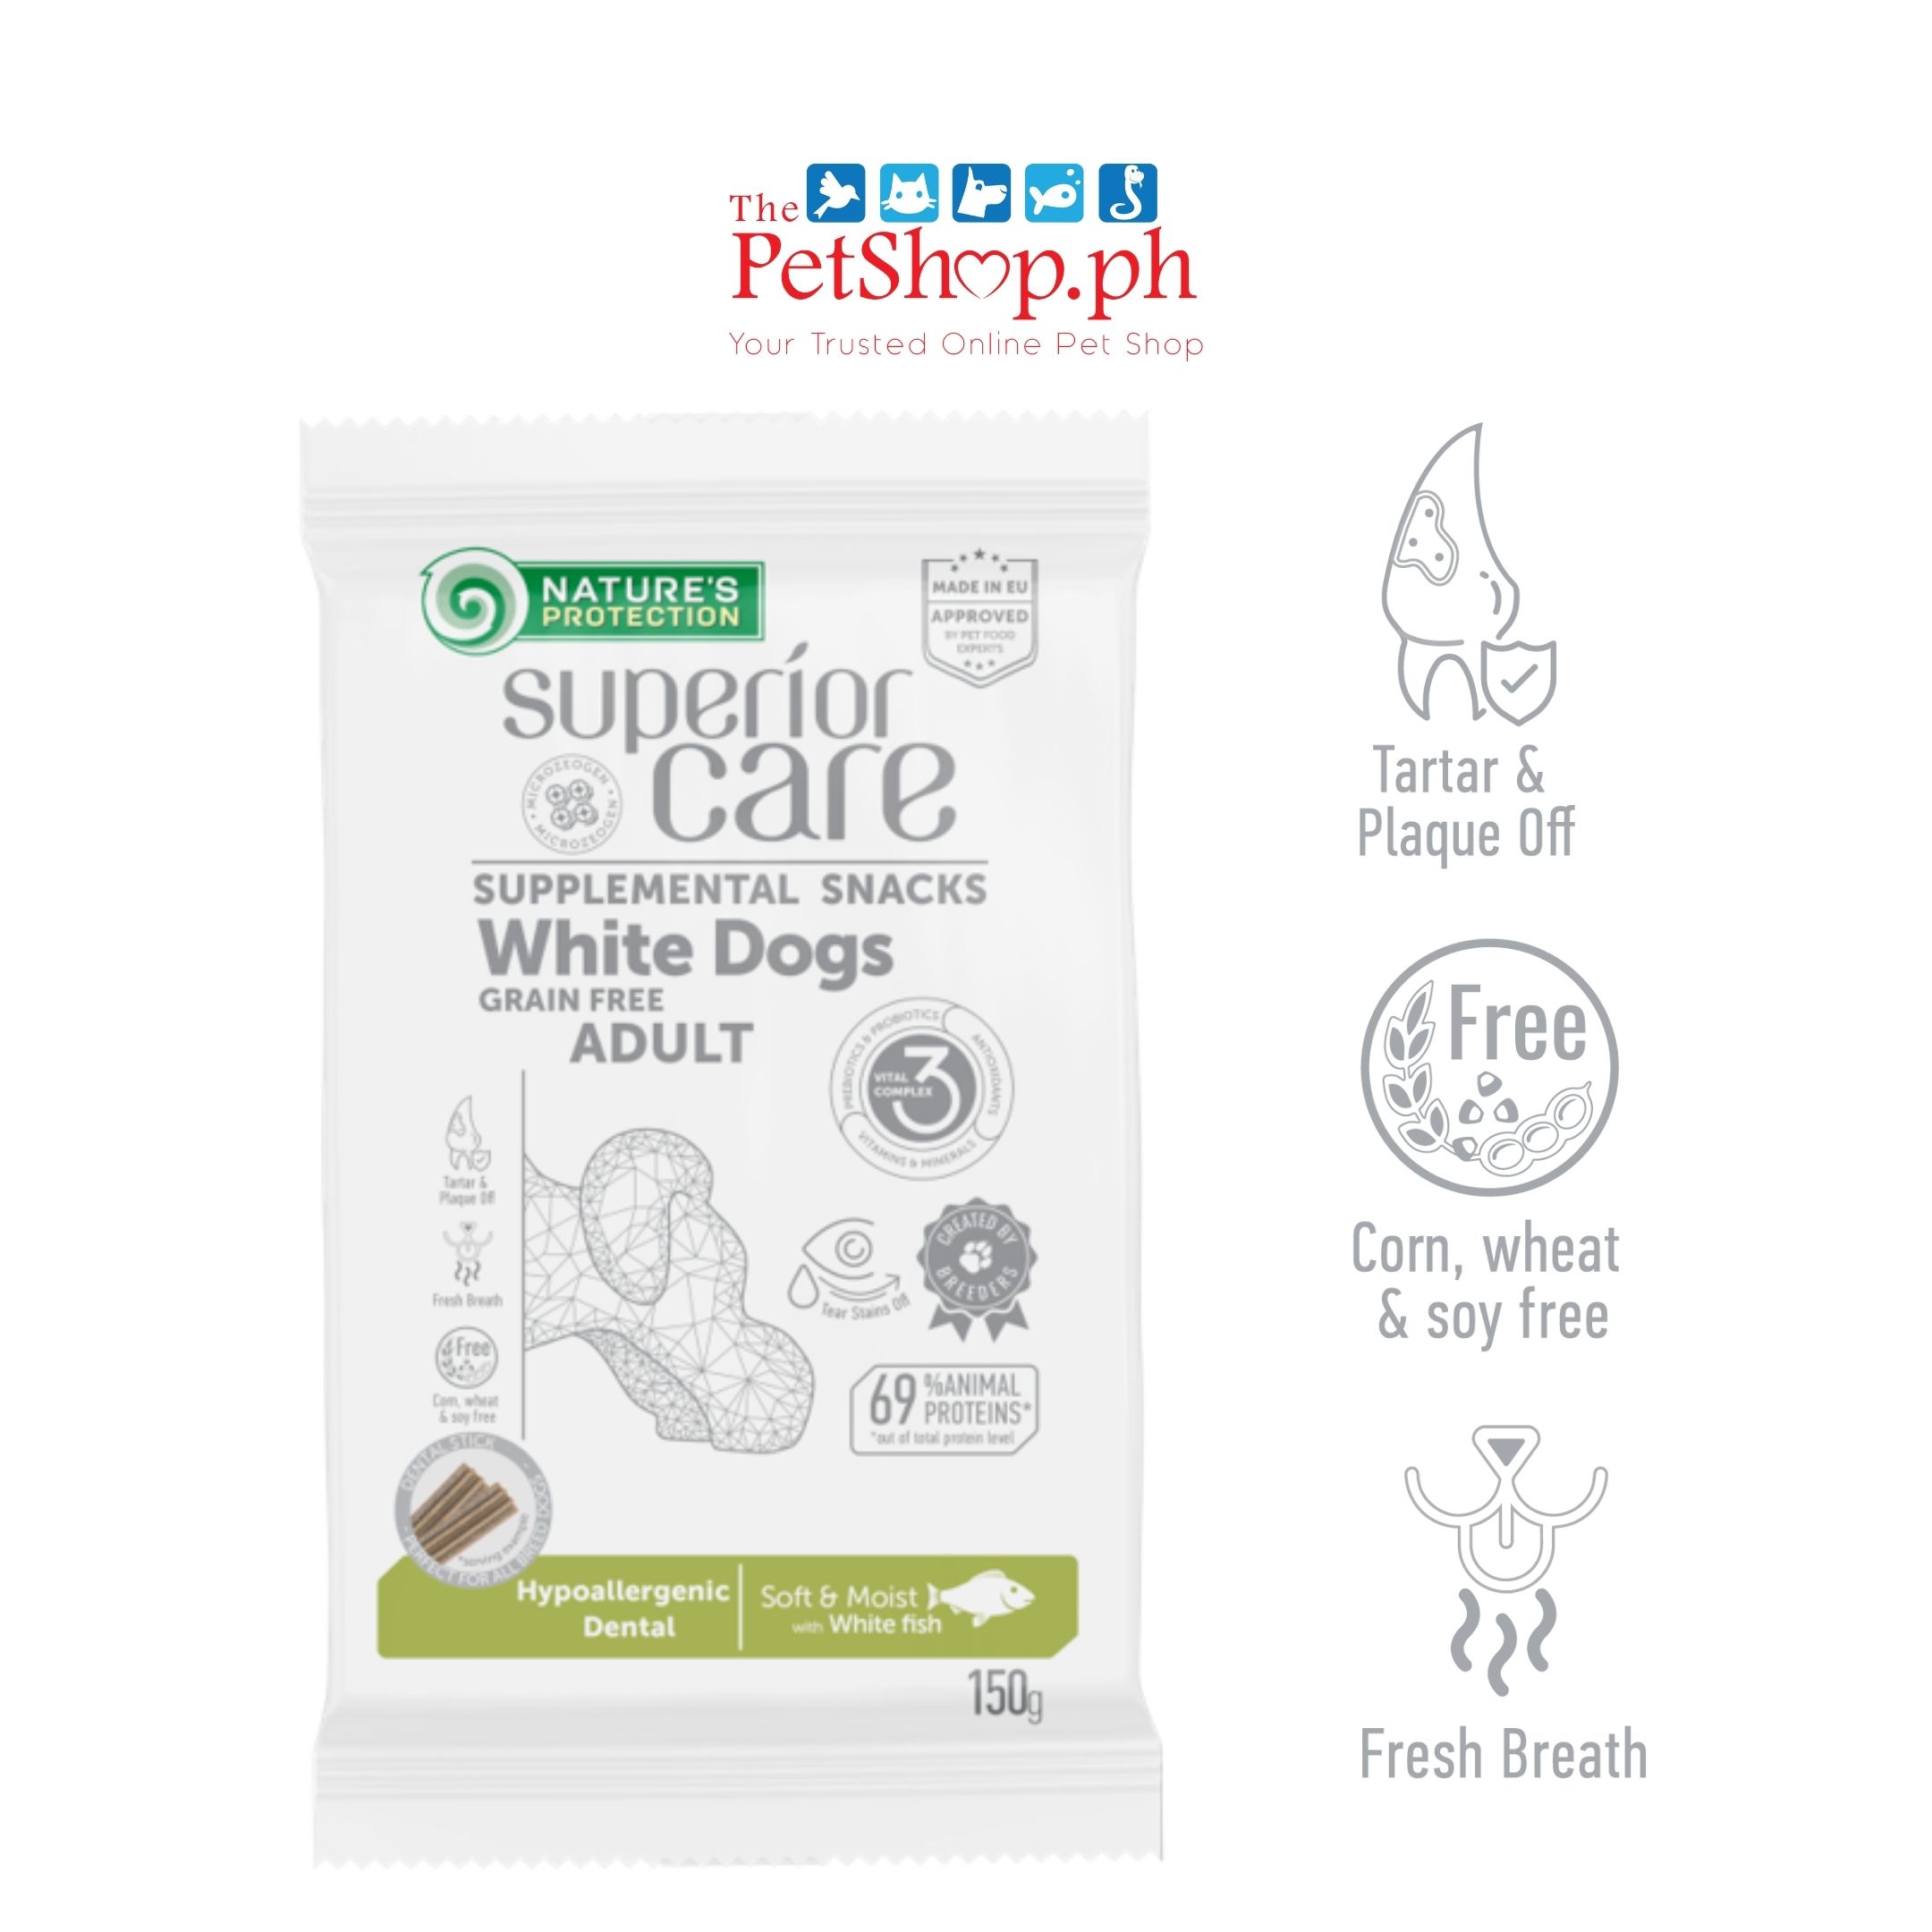 Nature's Protection Superior Care Supplemental Snacks for White Dogs - Hypoallergenic Dental with White Fish 150g 